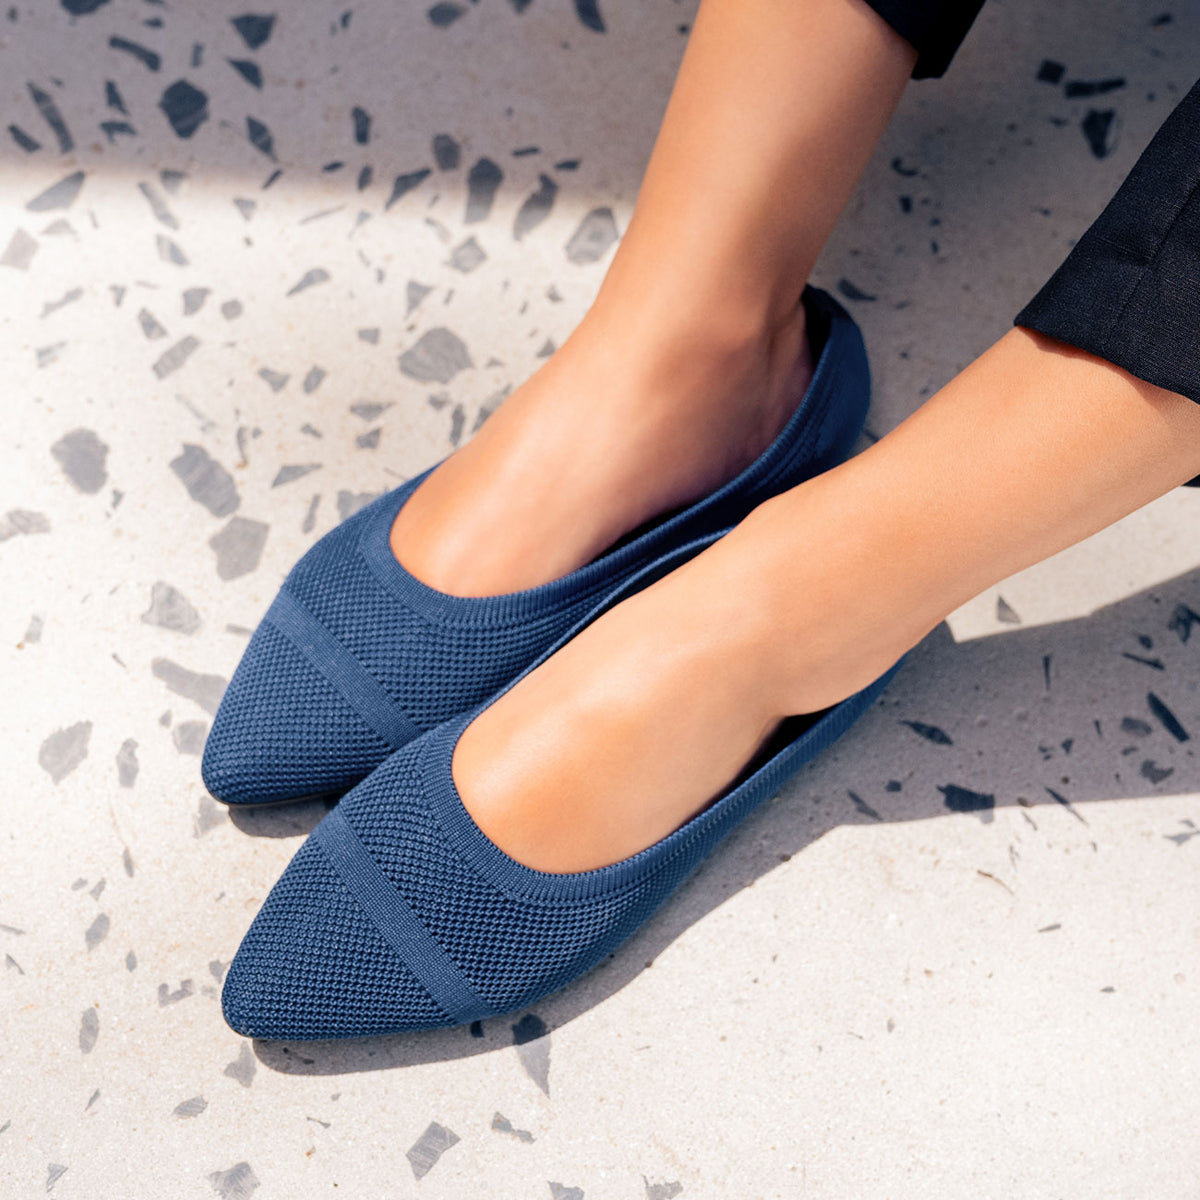 Women's Flats: Comfortable, Sustainable & Washable Flat Shoes